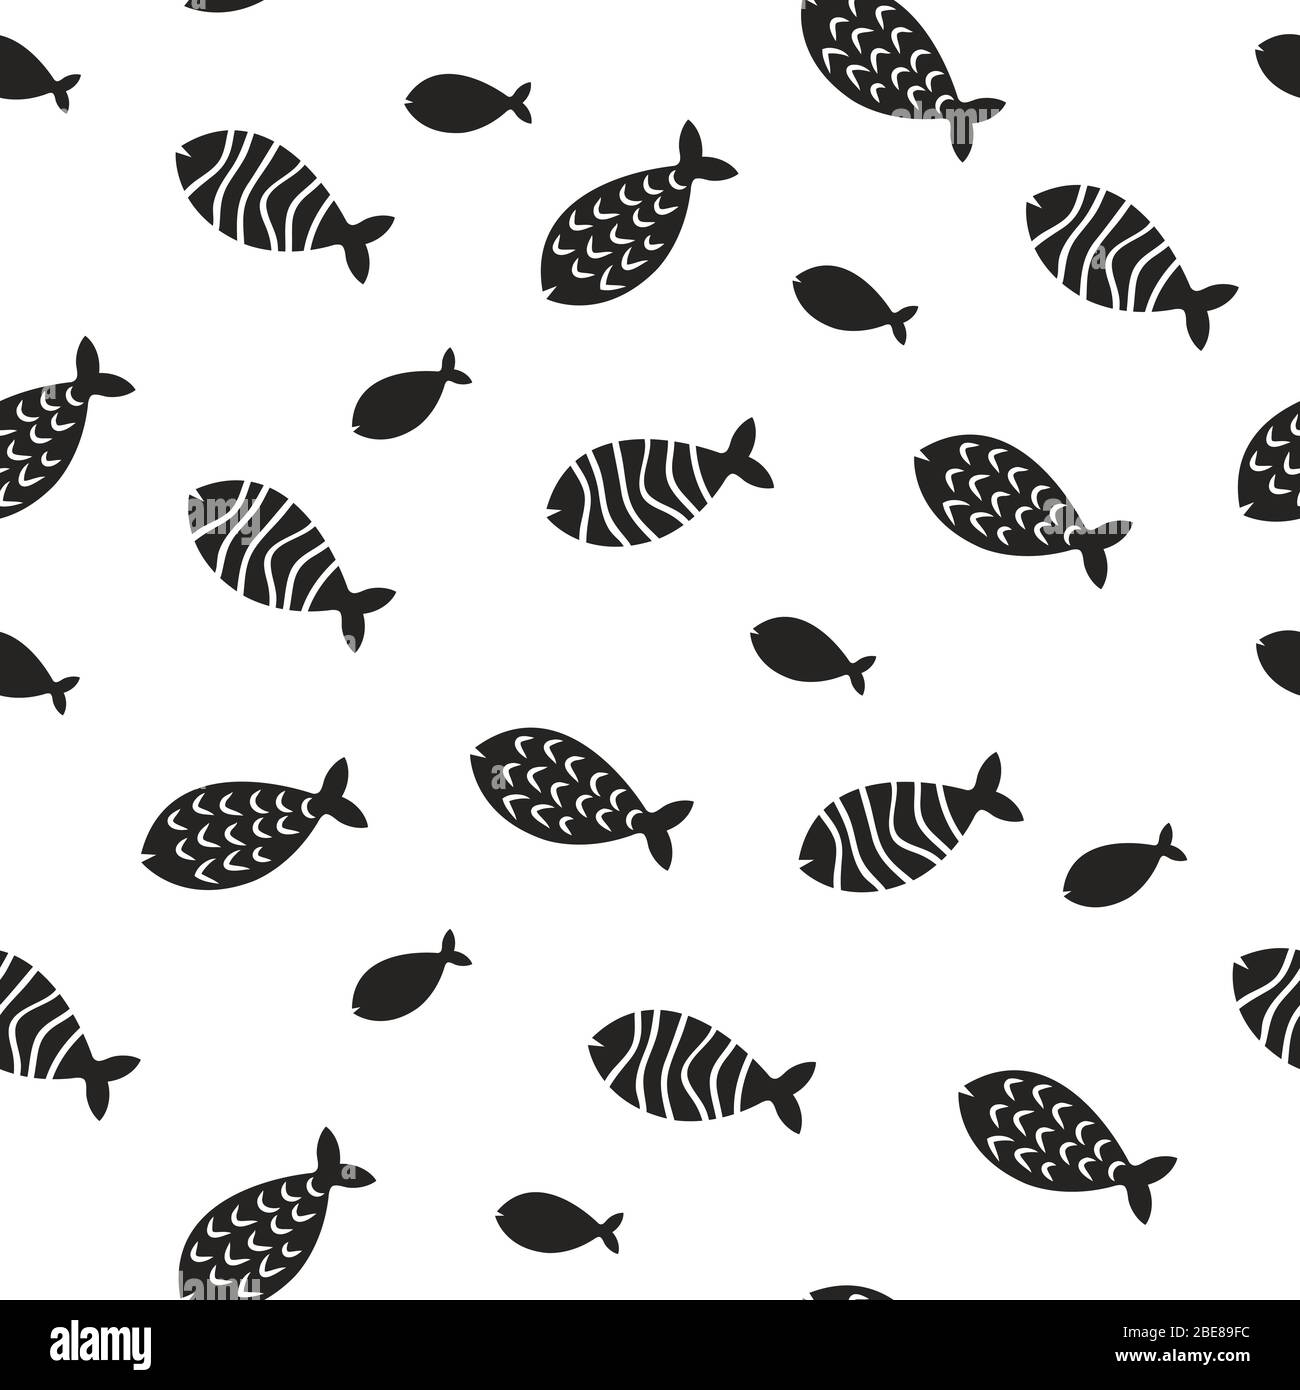 Swimming fish vector seamless pattern. Small silhouette fishes endless decoration. Monochrome fish pattern silhouette, seamless background underwater simple fish illustration Stock Vector